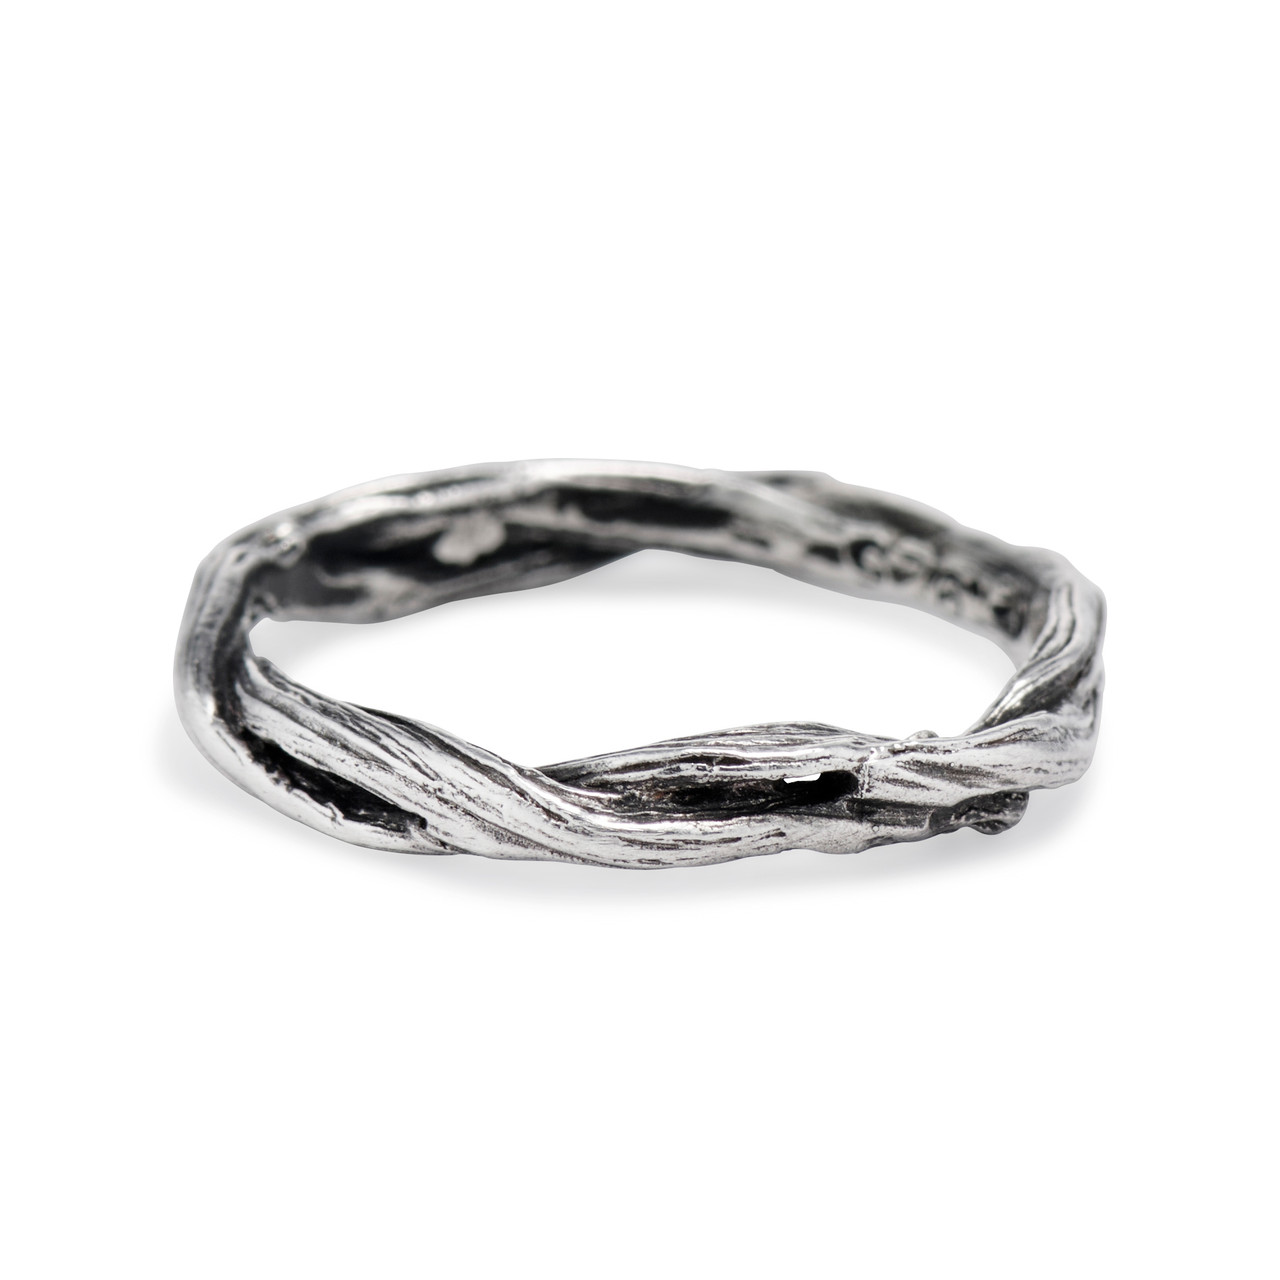 Women's Oxidized Silver Engagement Ring | Olivia Ewing